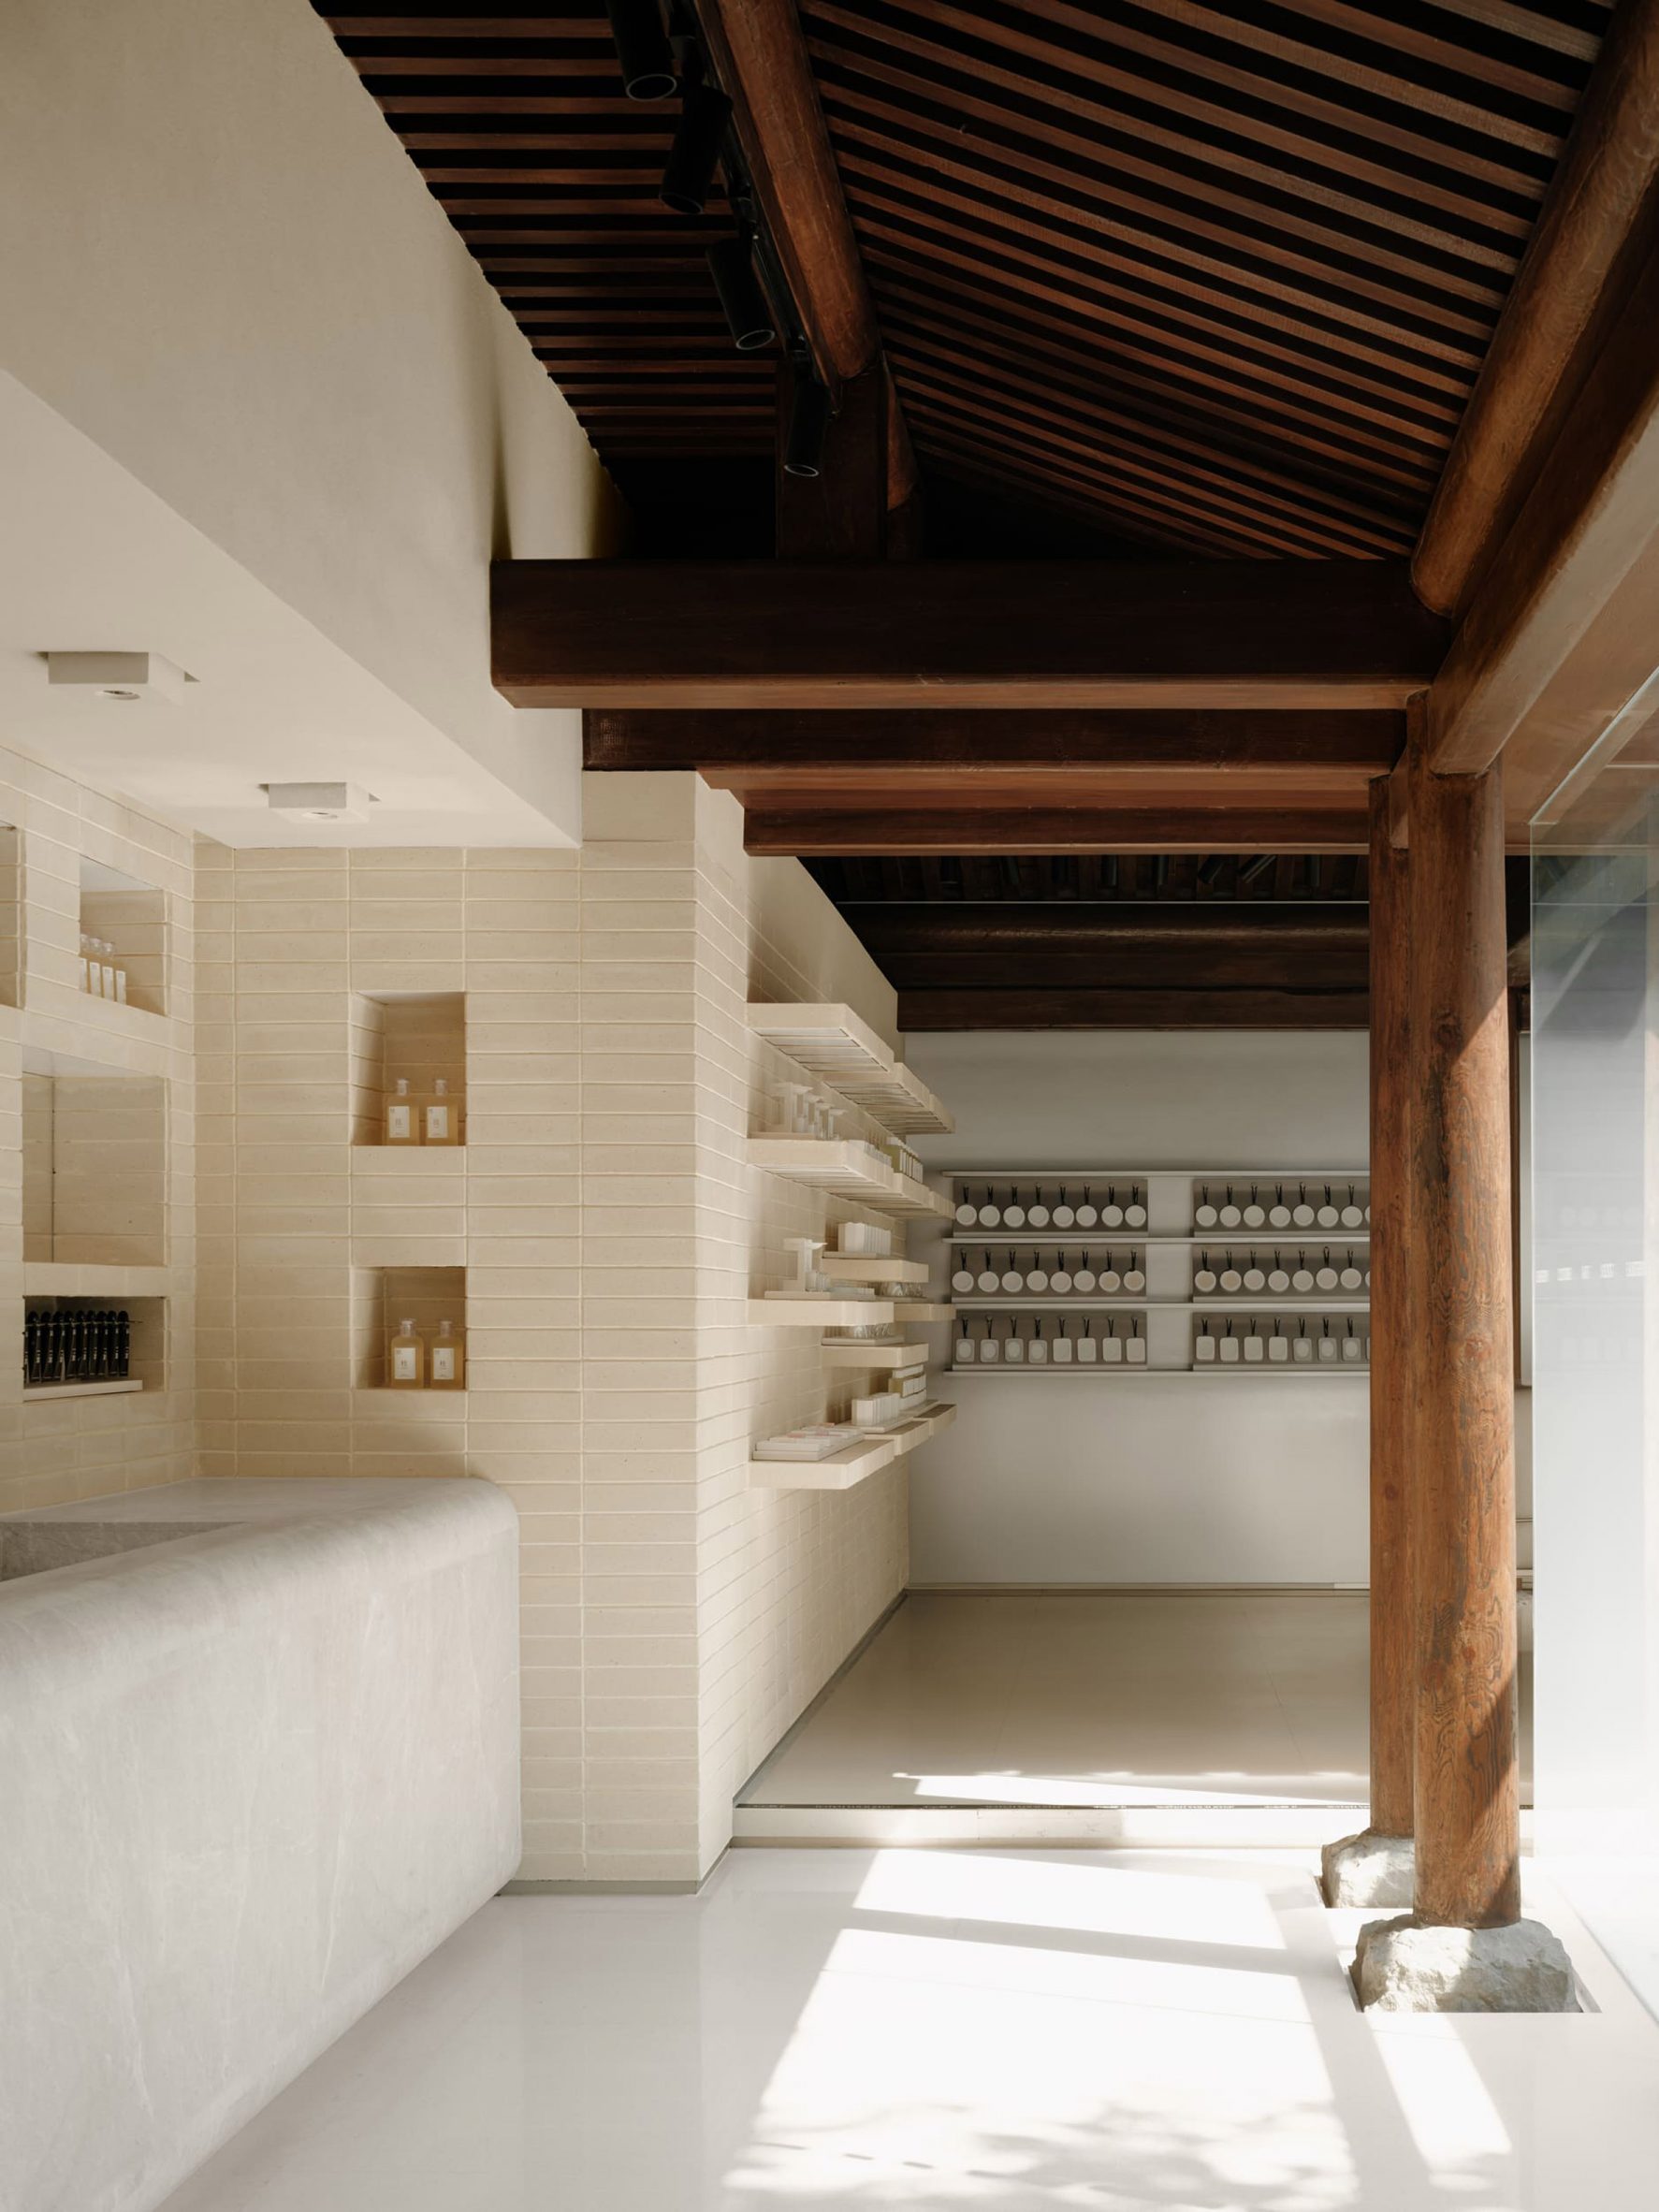 Interior of To Summer store with clay brick walls and shelves lined with fragrances